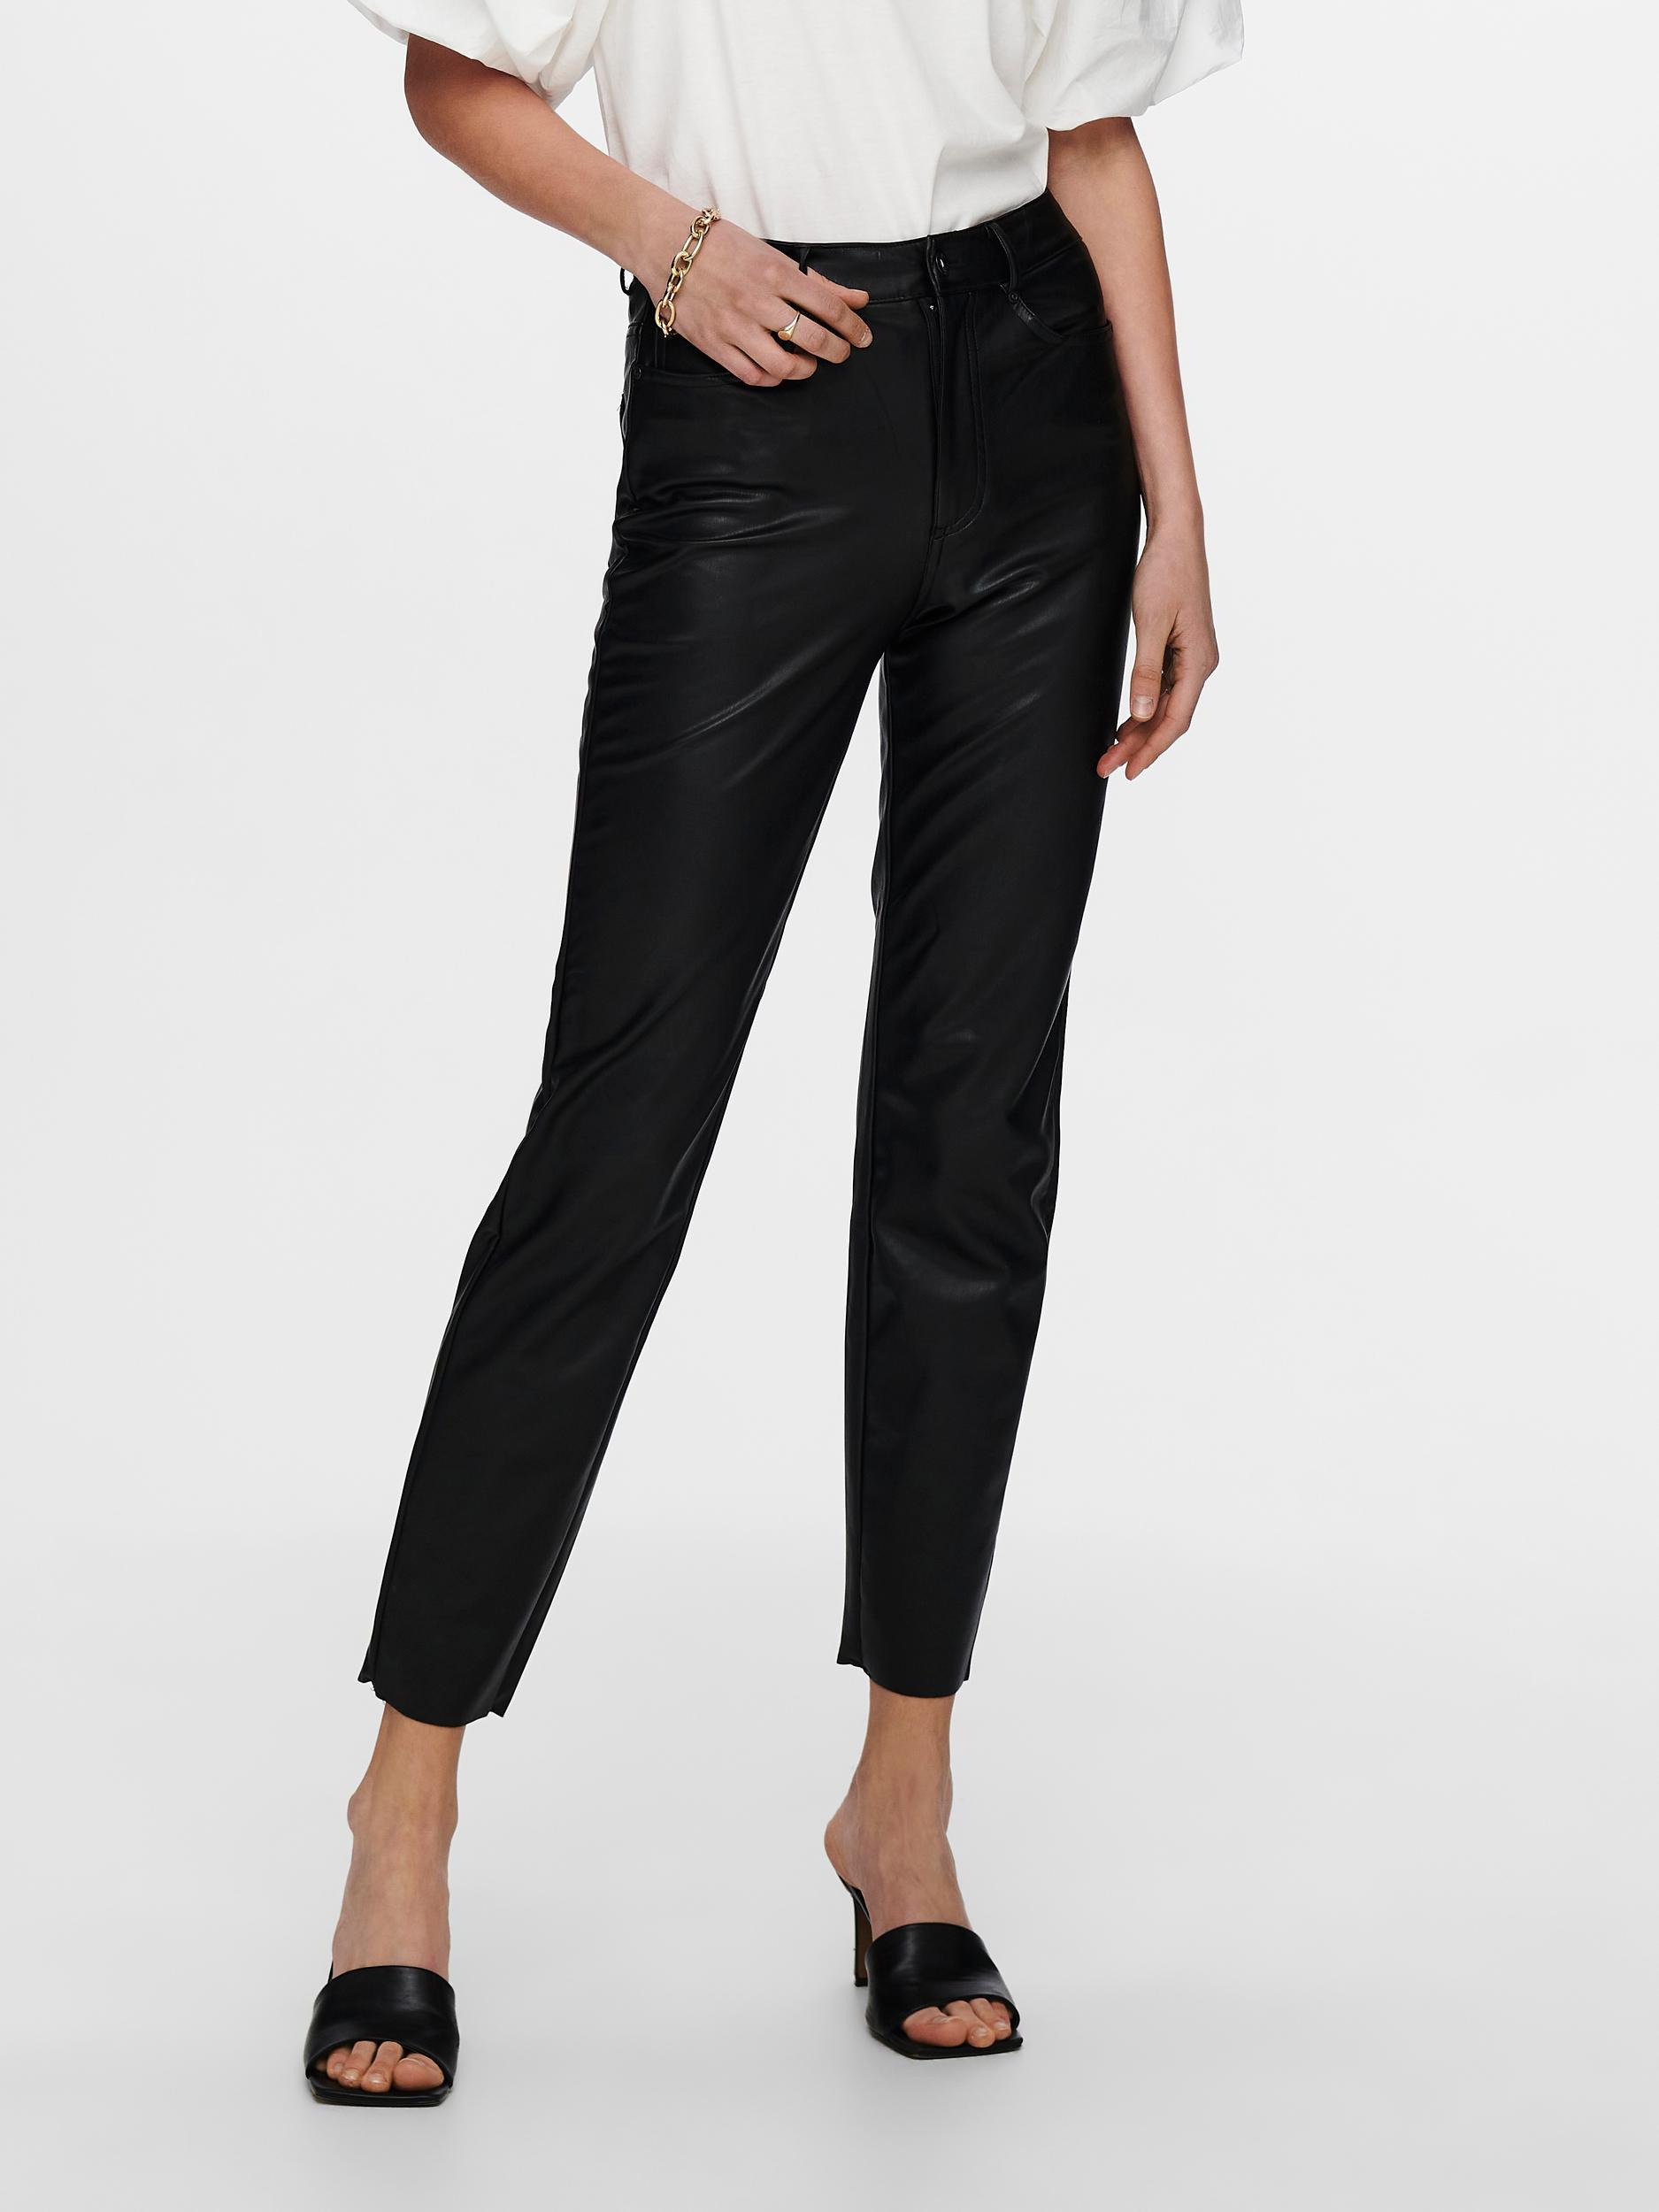 faux leathe trousers, Black, large image number 2